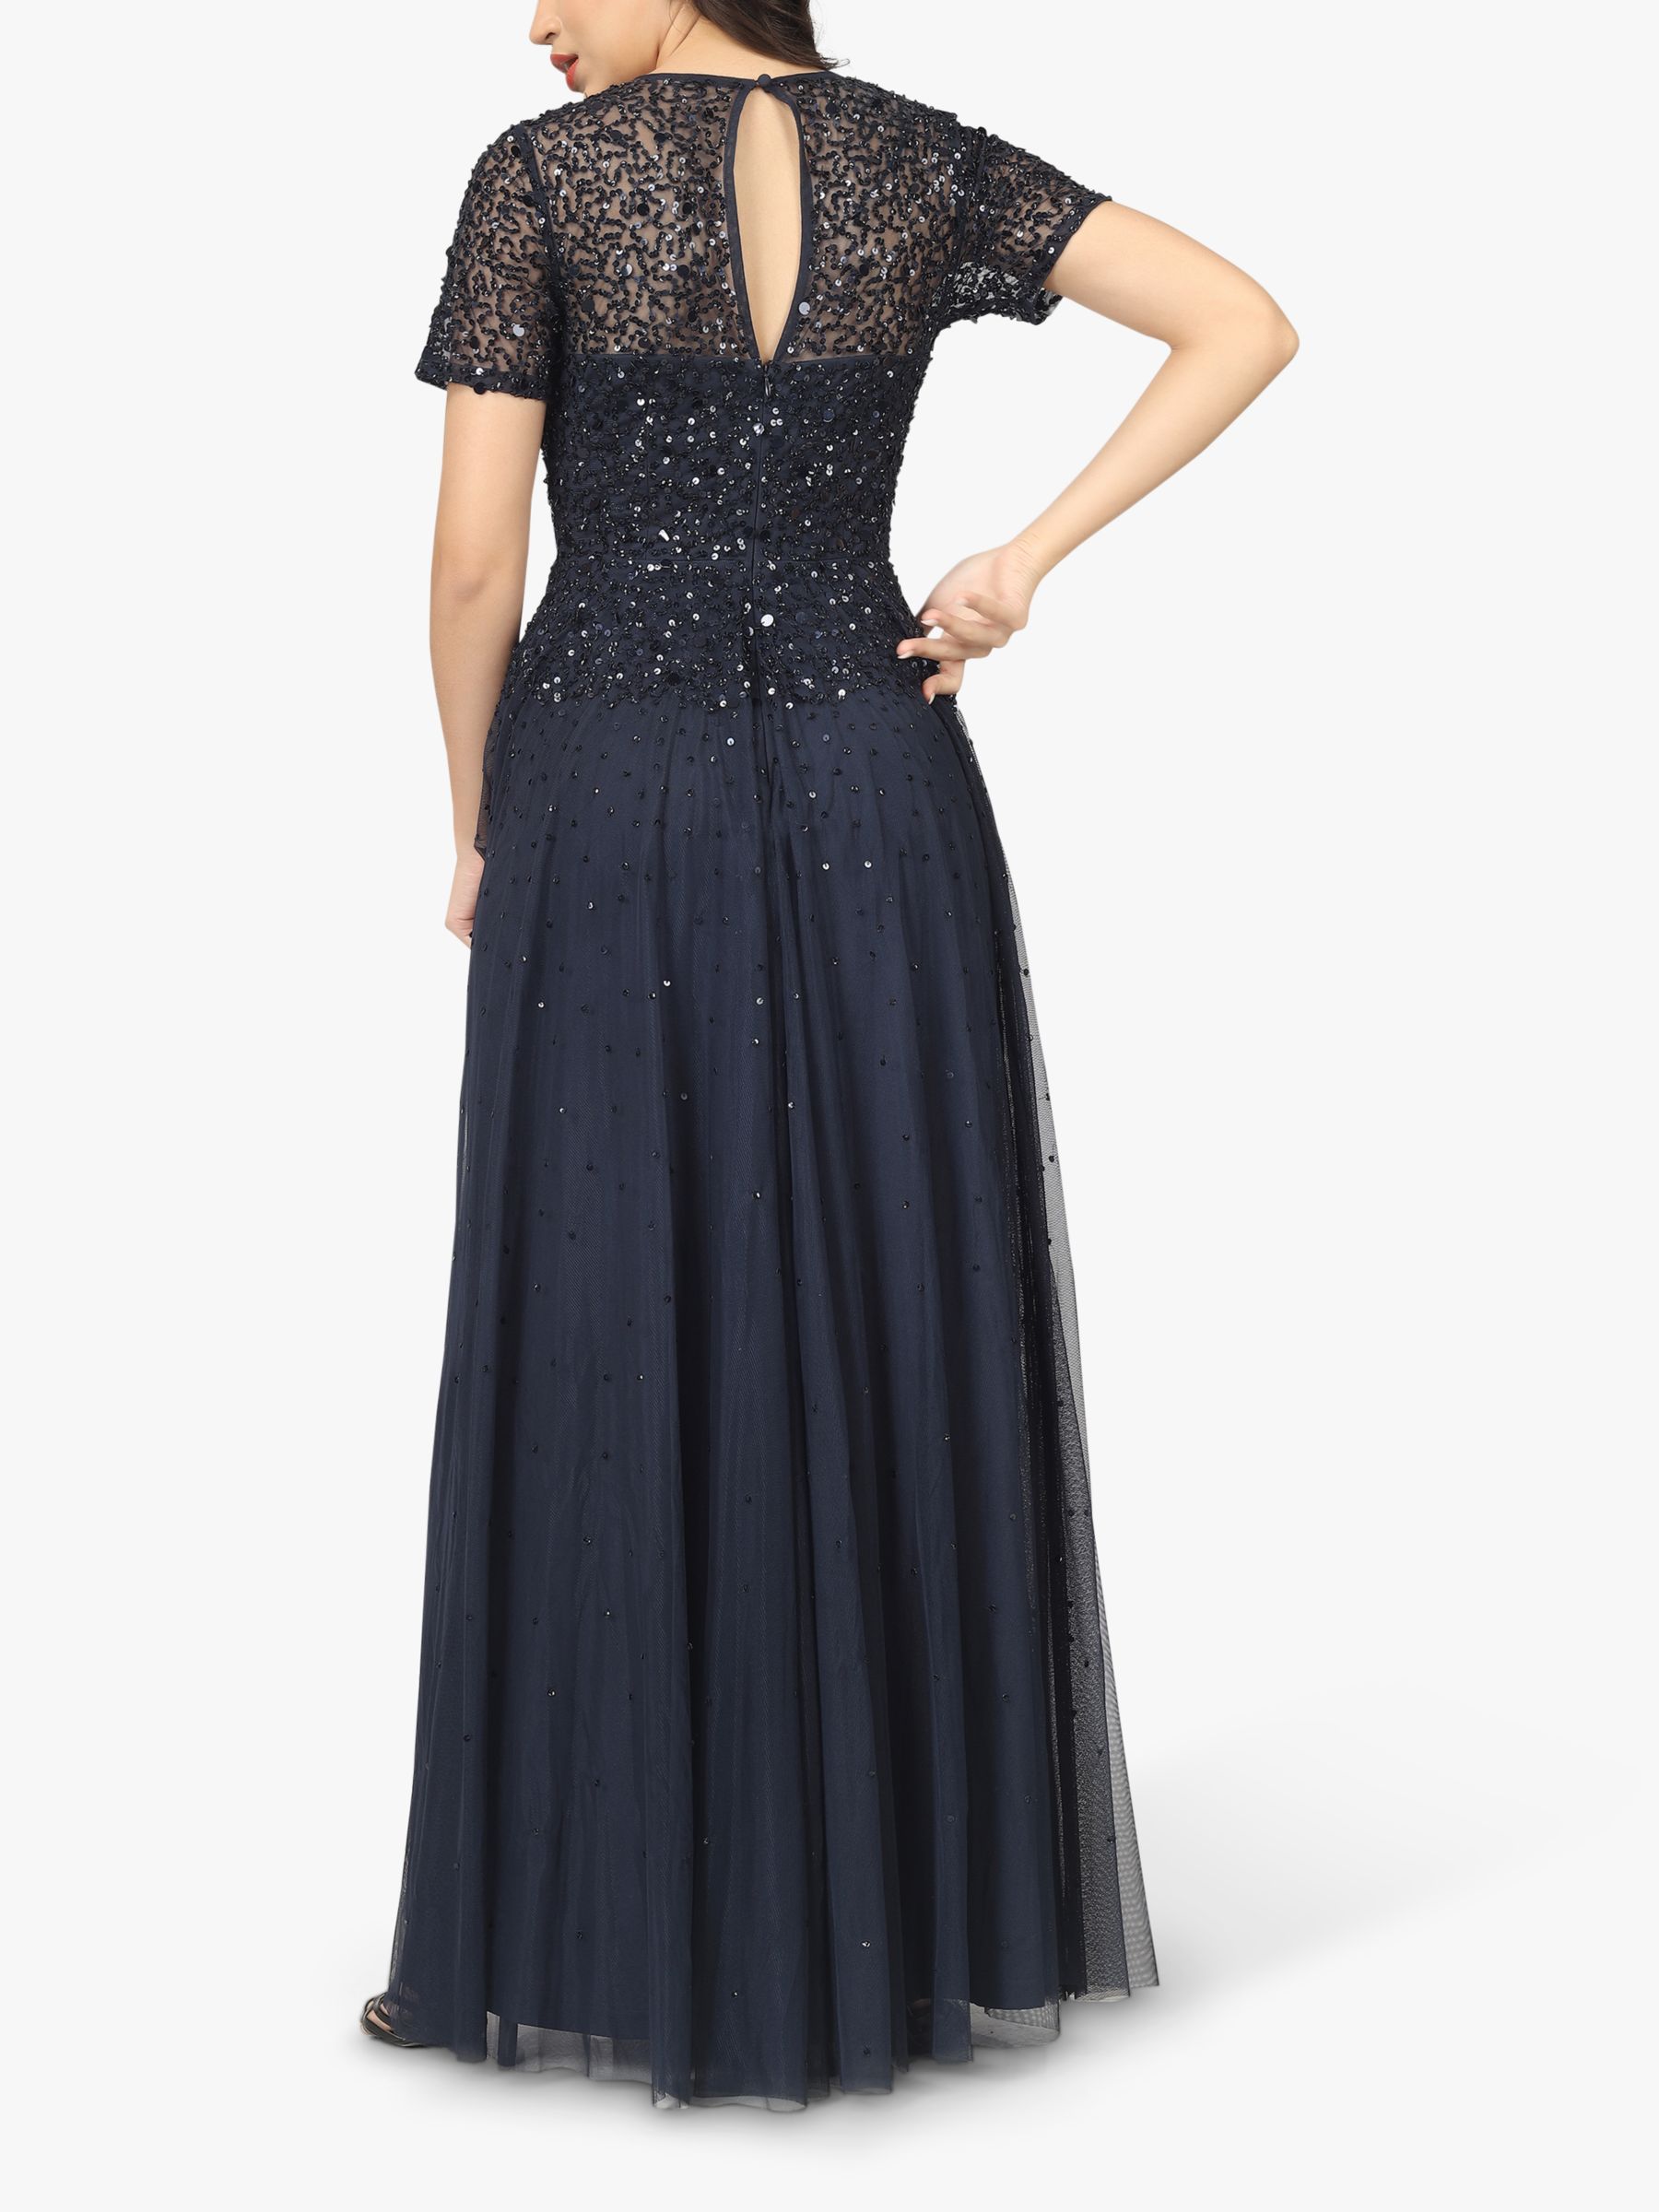 Buy Lace & Beads Montreal Embellished Maxi Dress Online at johnlewis.com